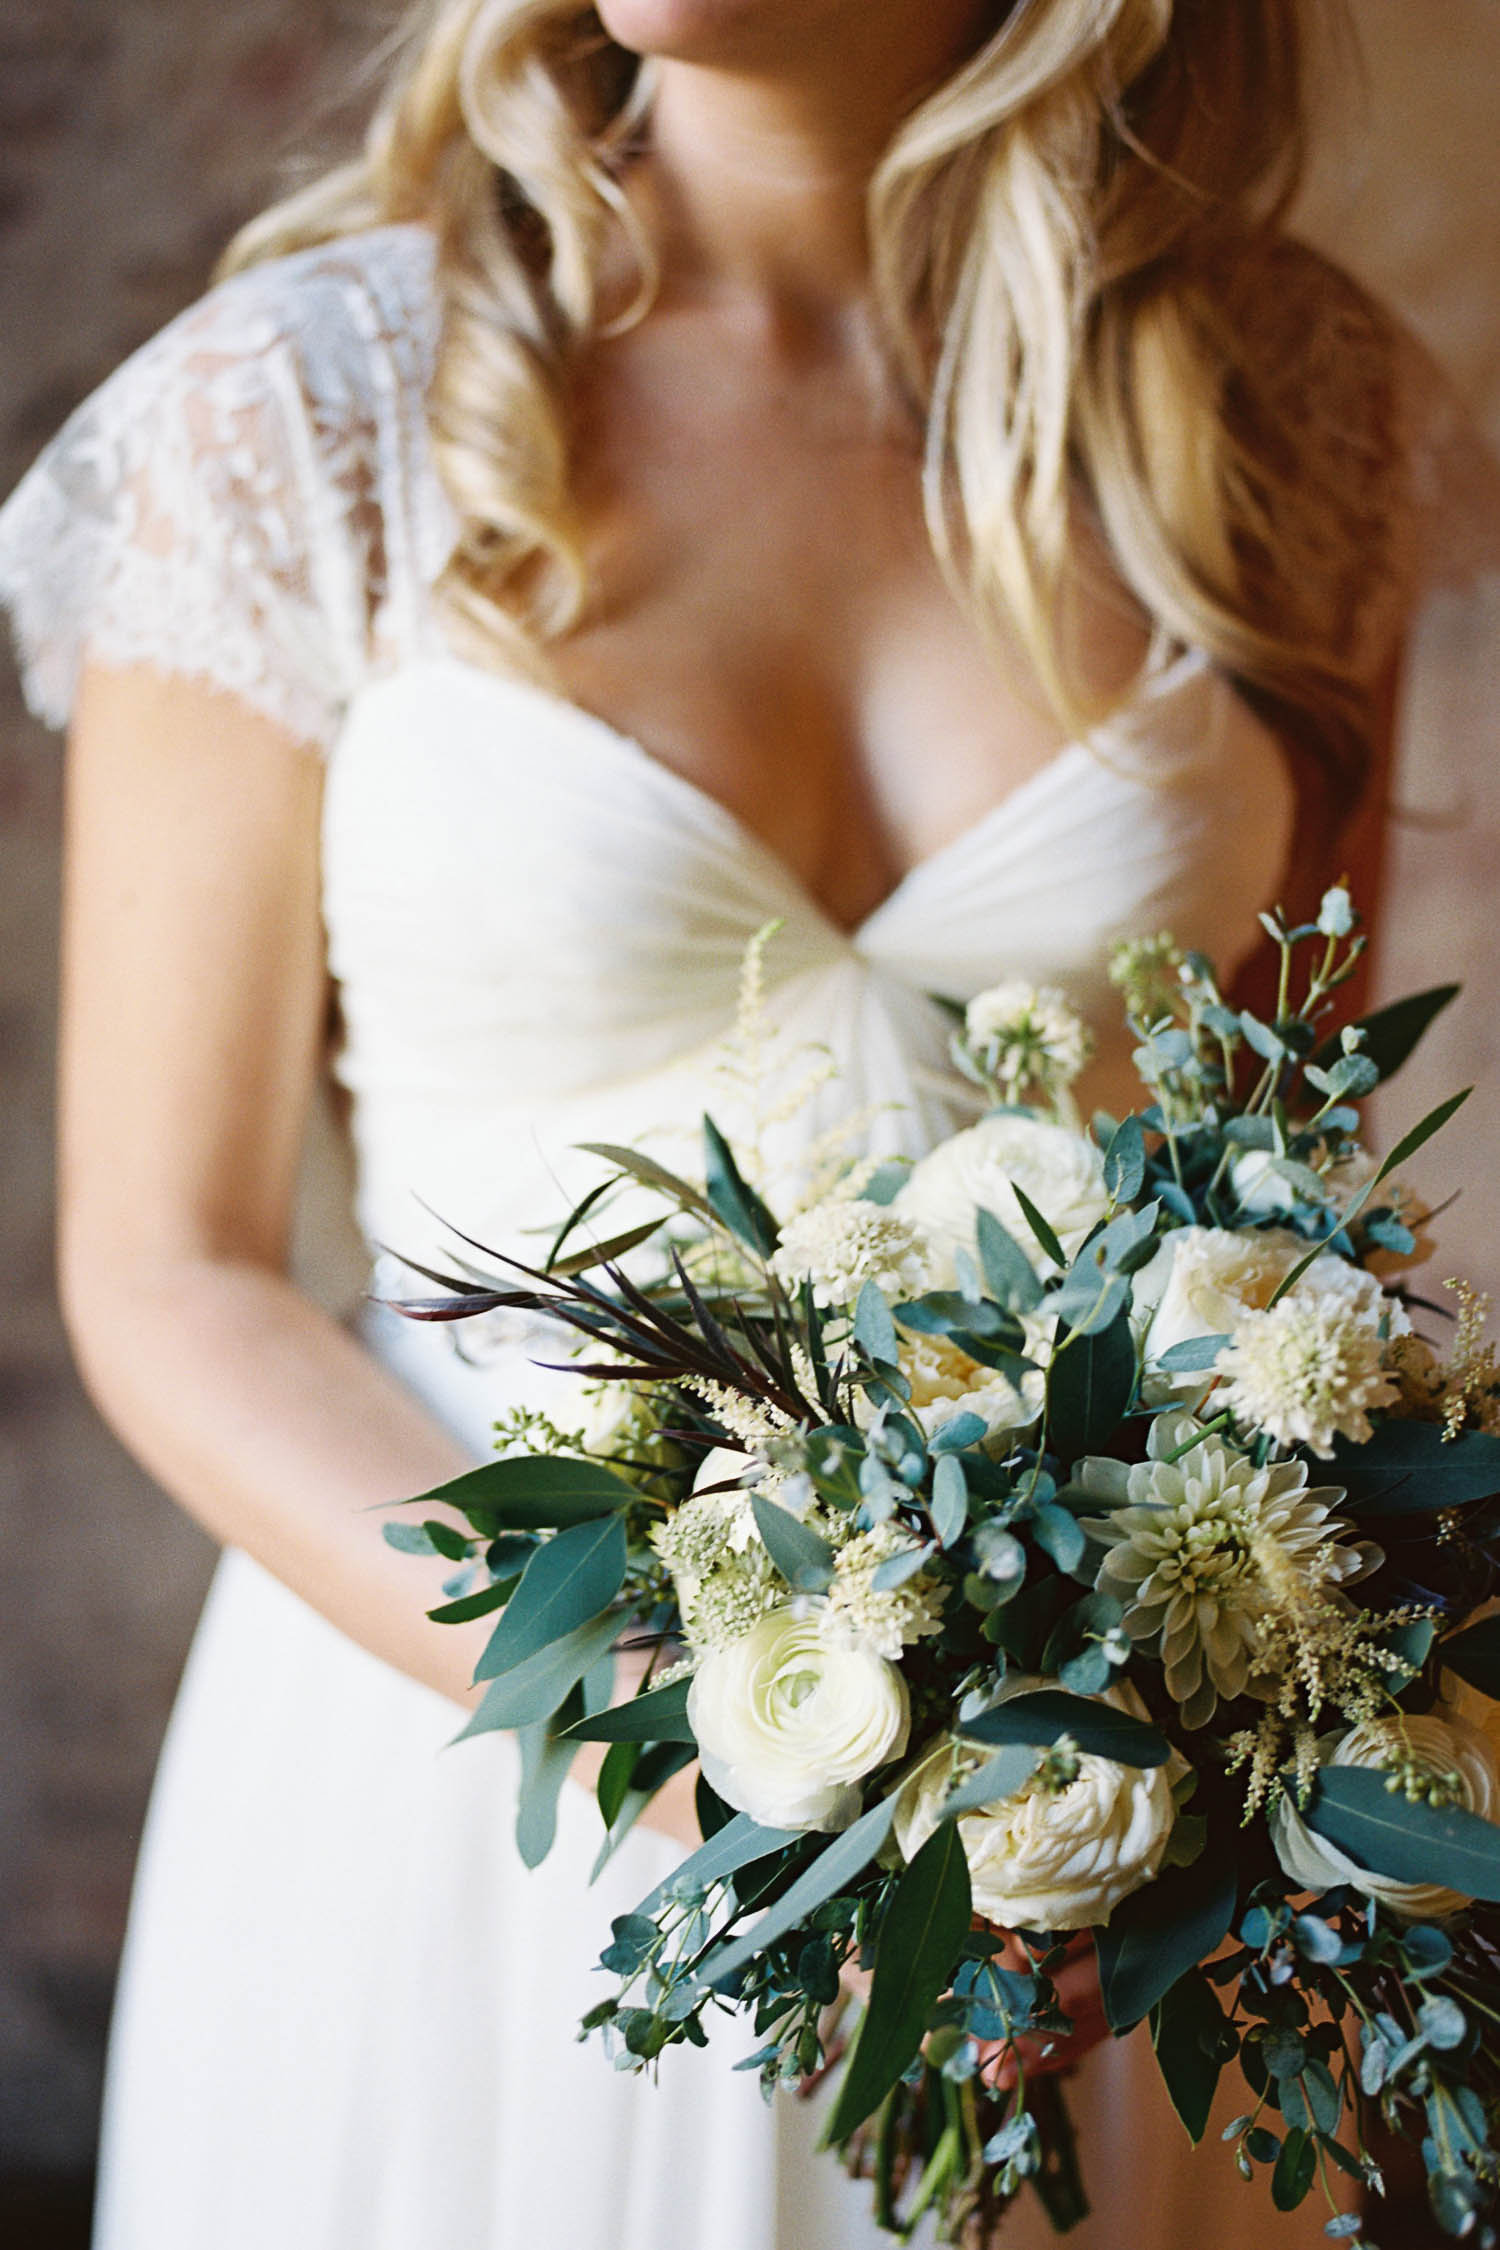 Loose, natural bridal bouquet of greenery and ivory flowers